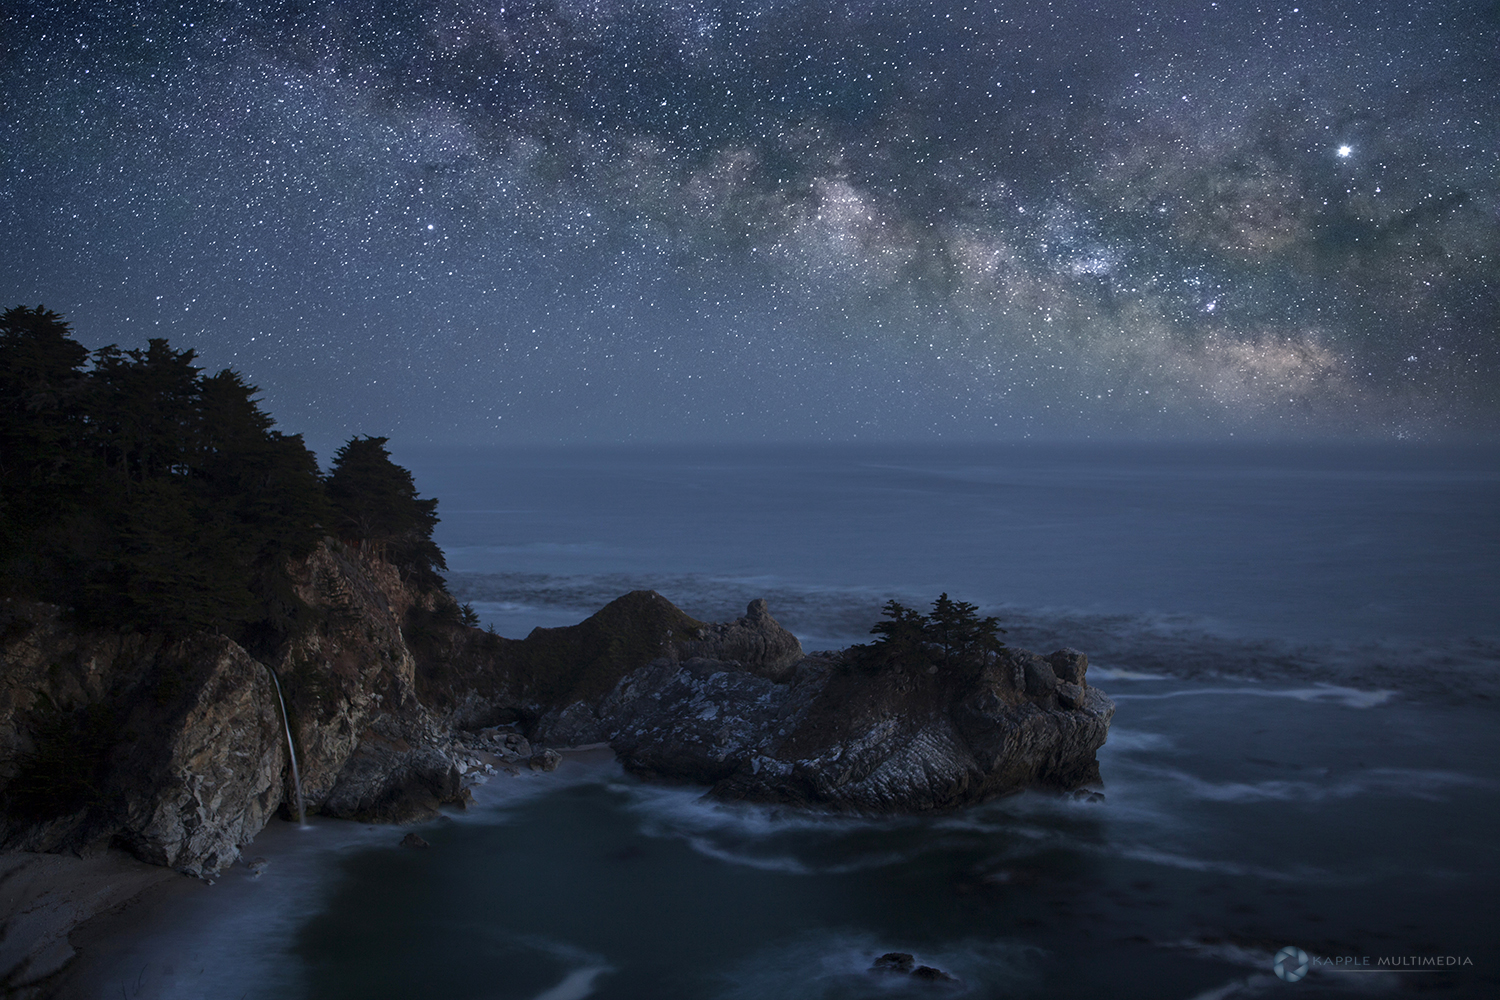 McWay Falls and the Milky way